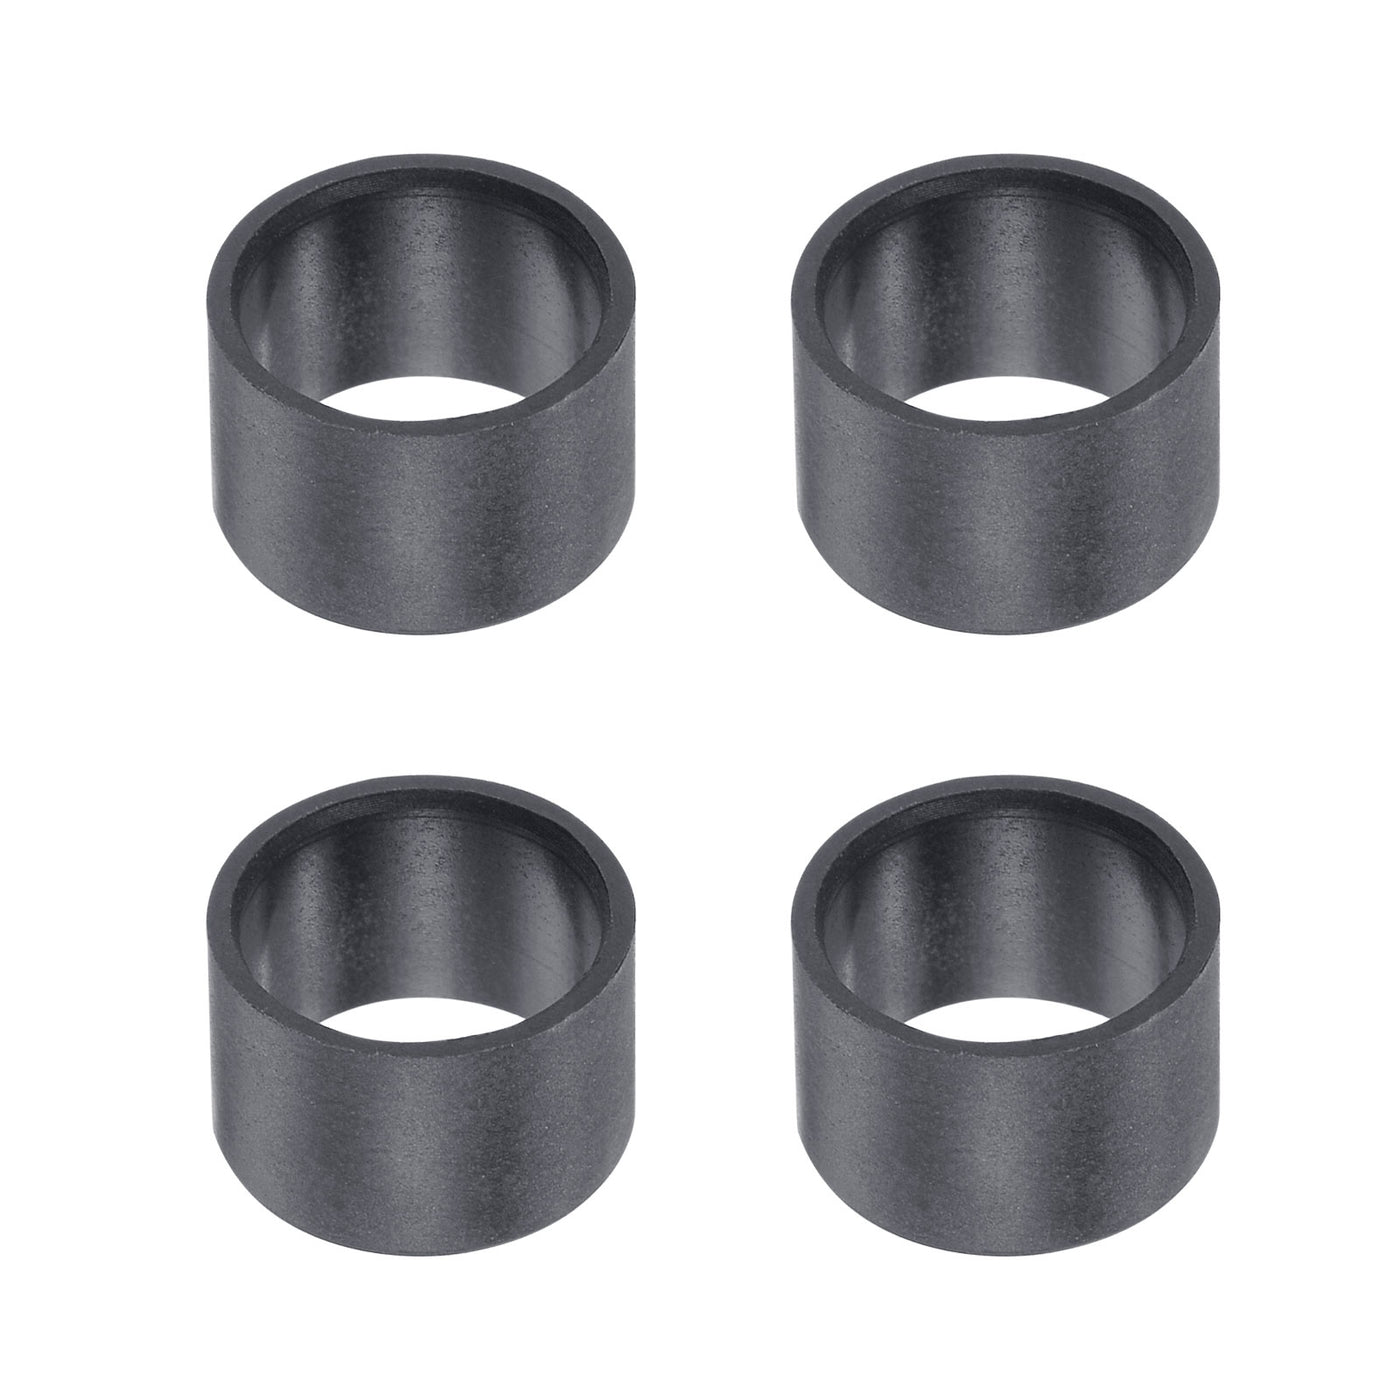 uxcell Uxcell Sleeve Bearings 10mmx12mmx8mm POM Wrapped Oilless Bushings Black 4pcs